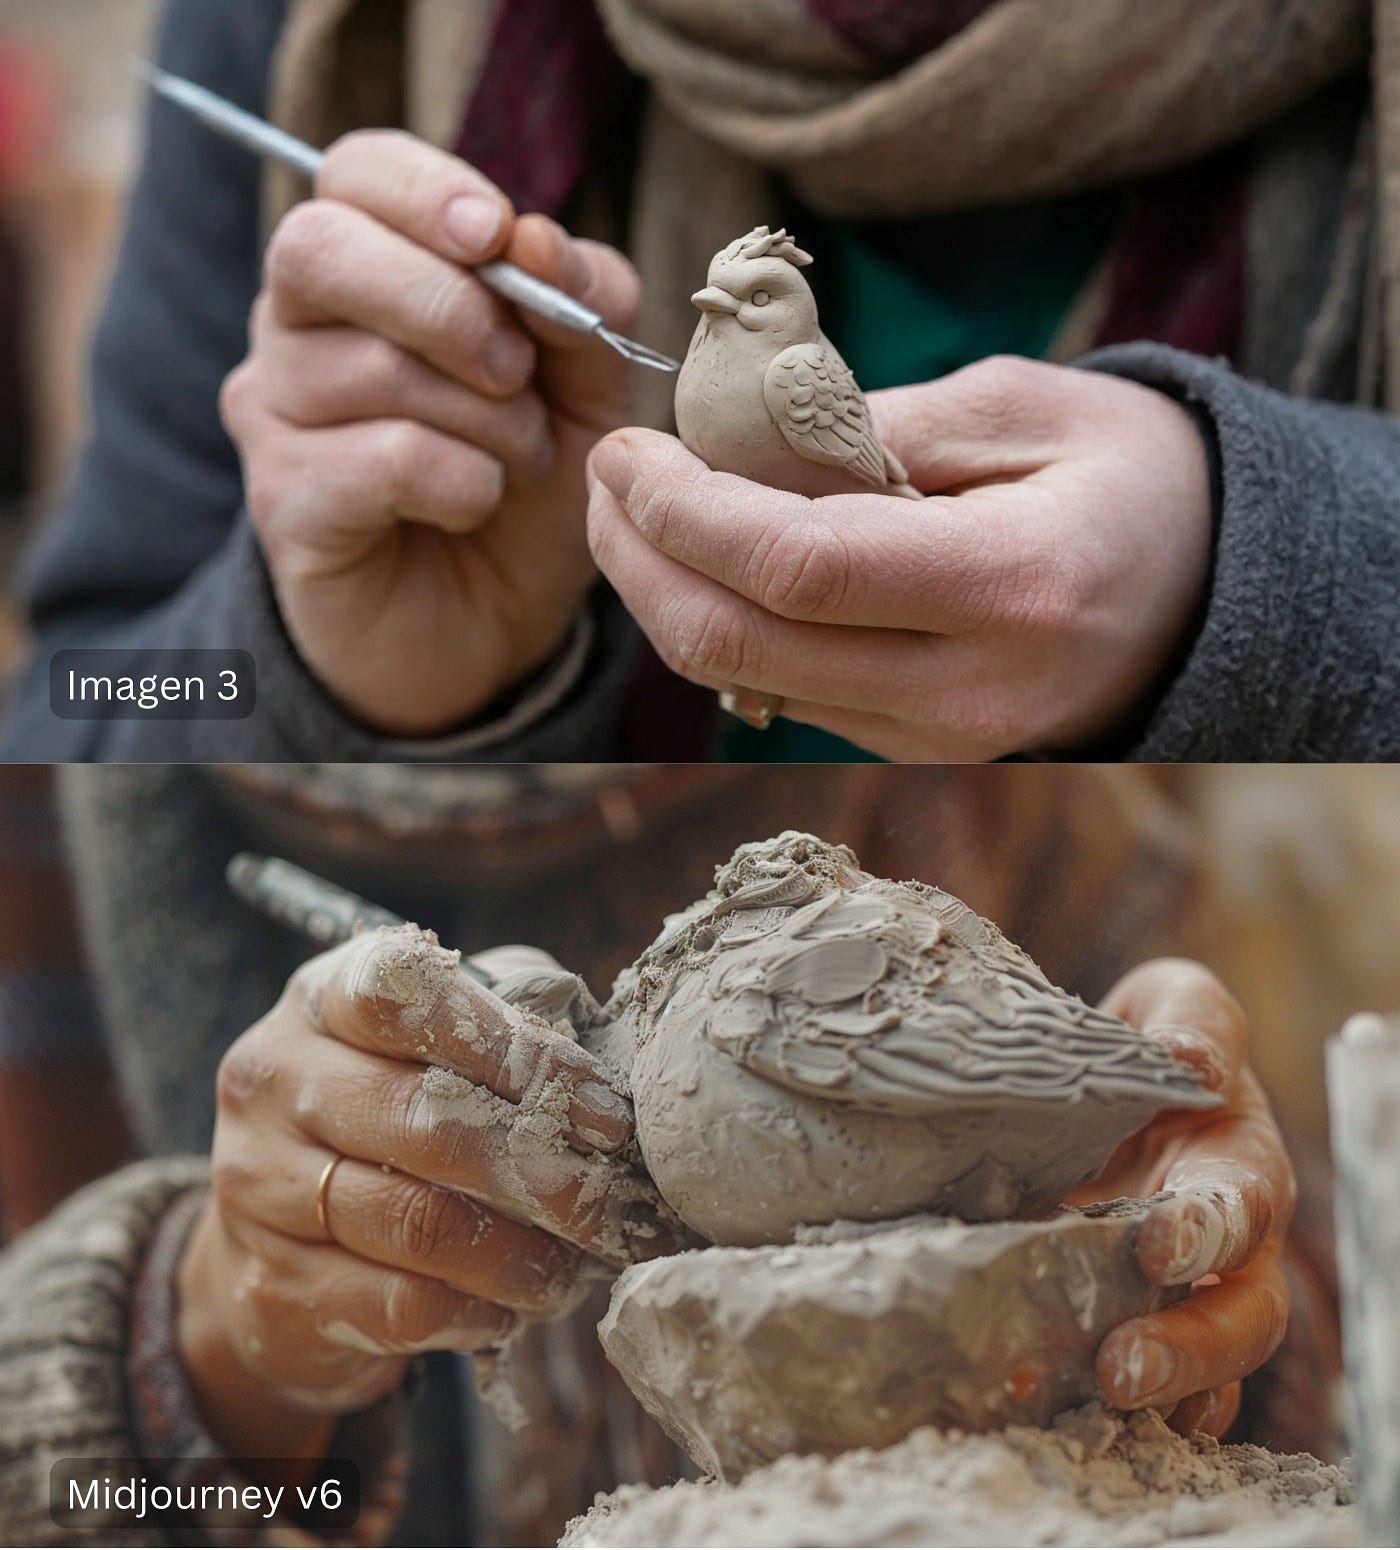 A view of a person’s hand as they hold a little clay figurine of a bird in their hand and sculpt it with a modeling tool in their other hand. You can see the sculptor’s scarf. Their hands are covered in clay dust. a macro DSLR image highlighting the texture and craftsmanship.